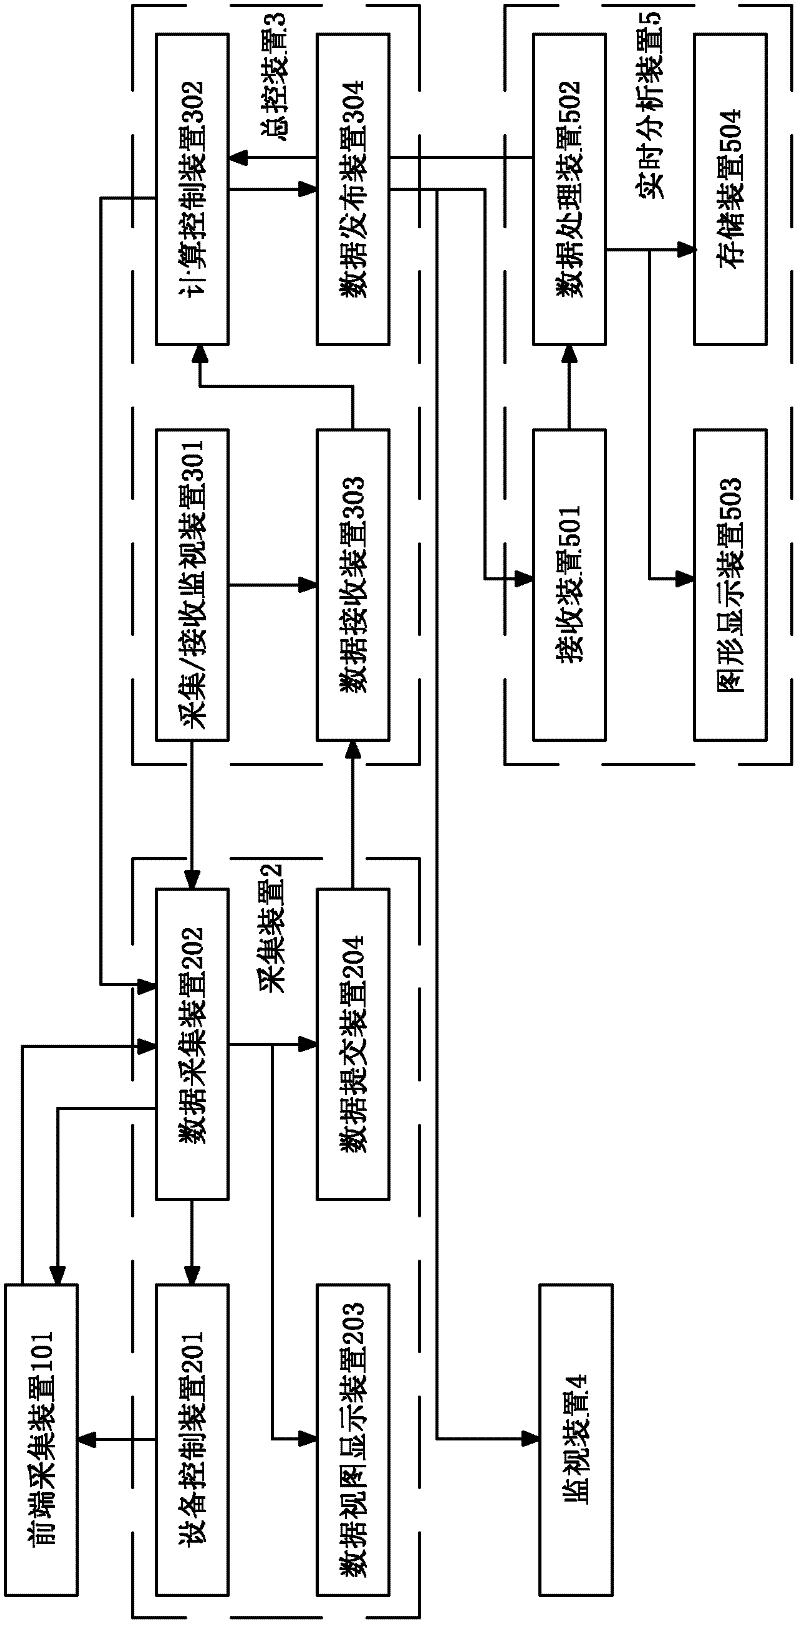 Measurement and control system for test network and data acquisition control method